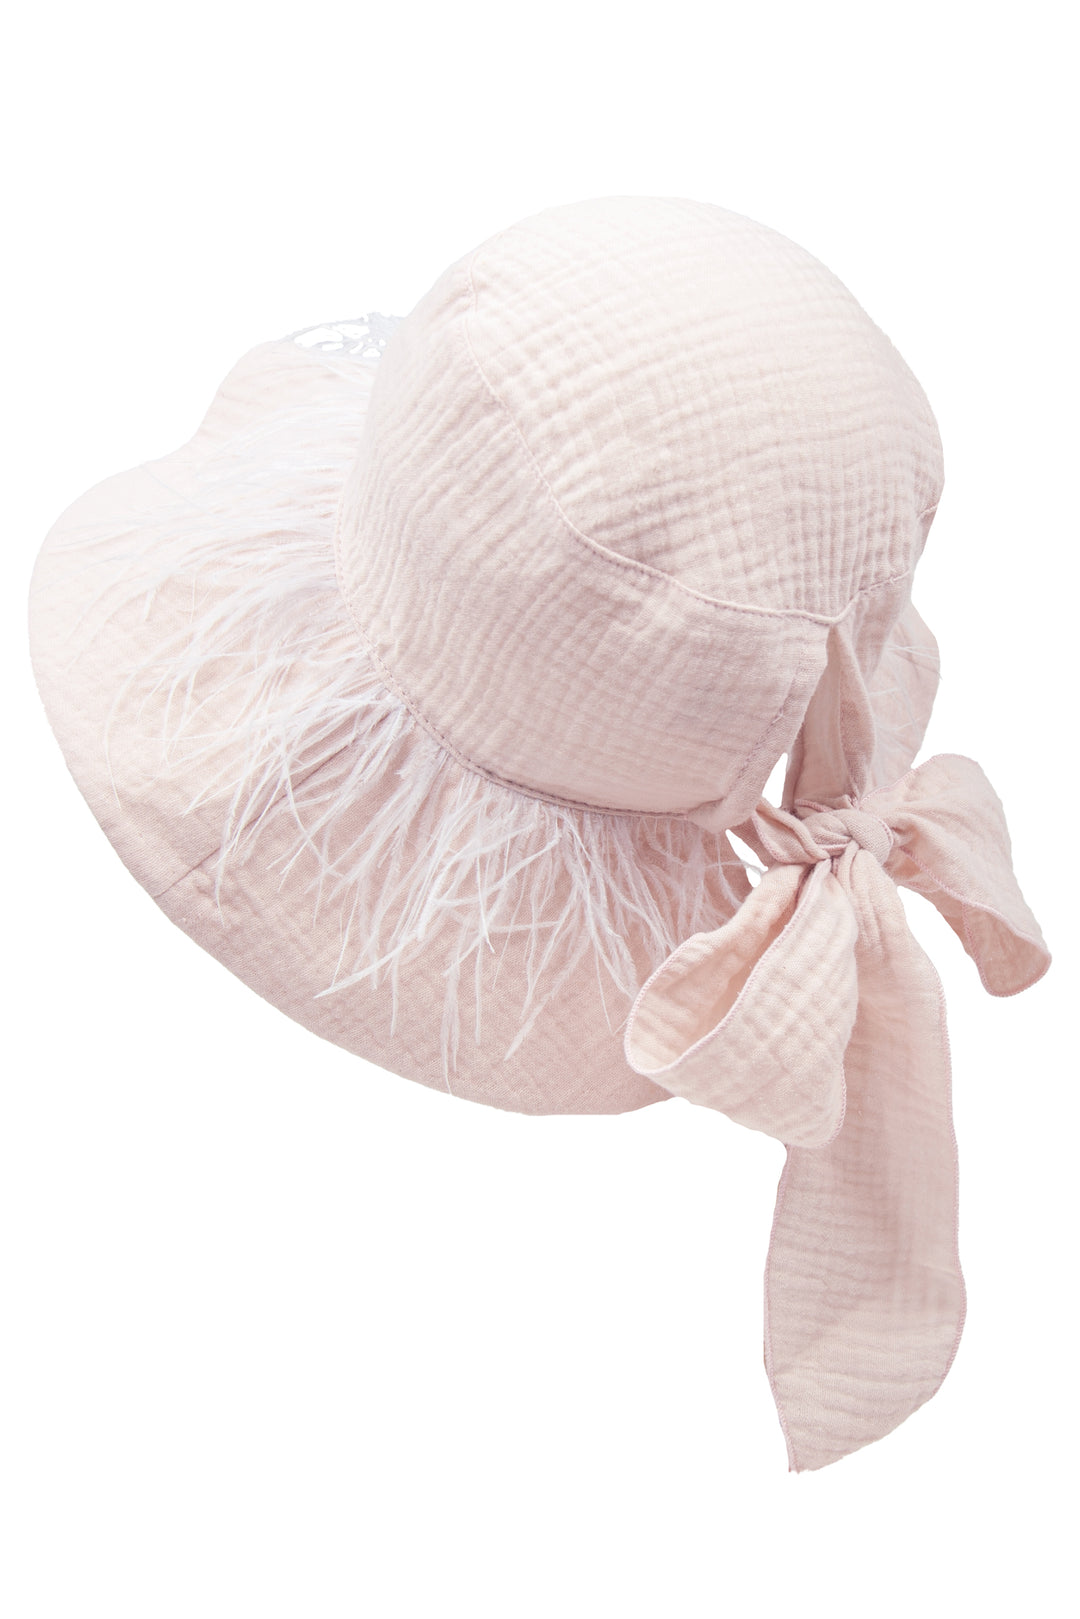 Jamiks "Akali" Apricot Cheesecloth Feather Trim Hat | iphoneandroidapplications